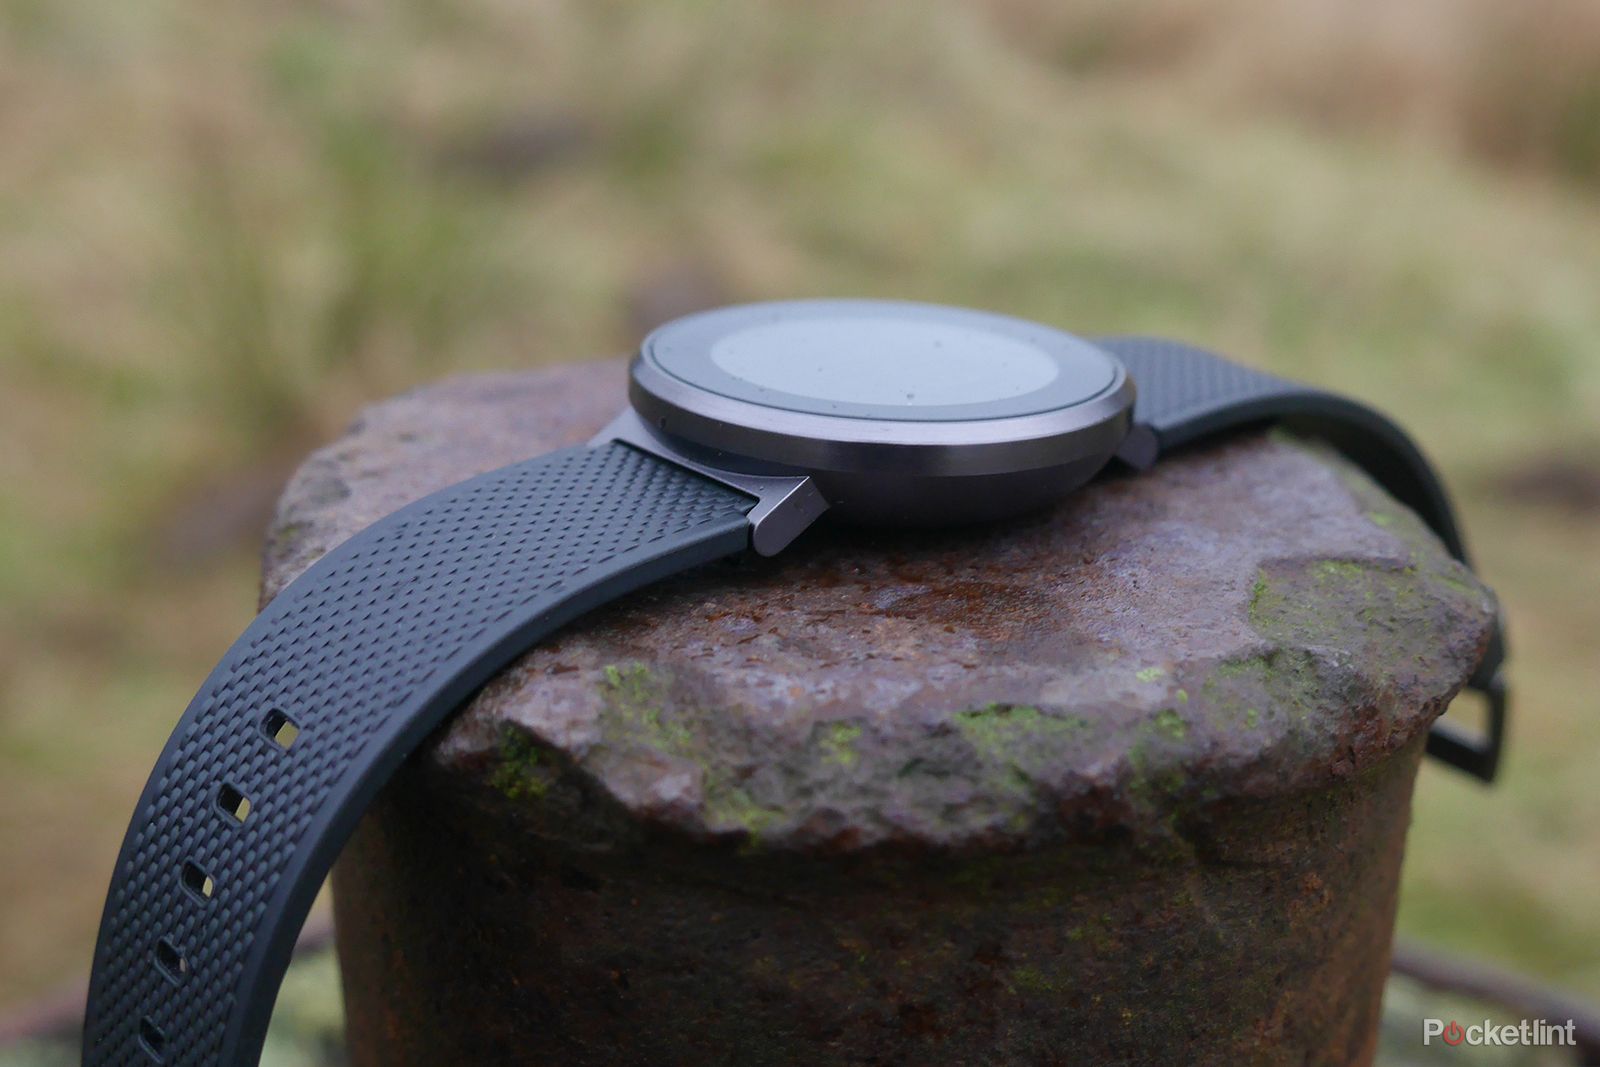 huawei fit review image 3